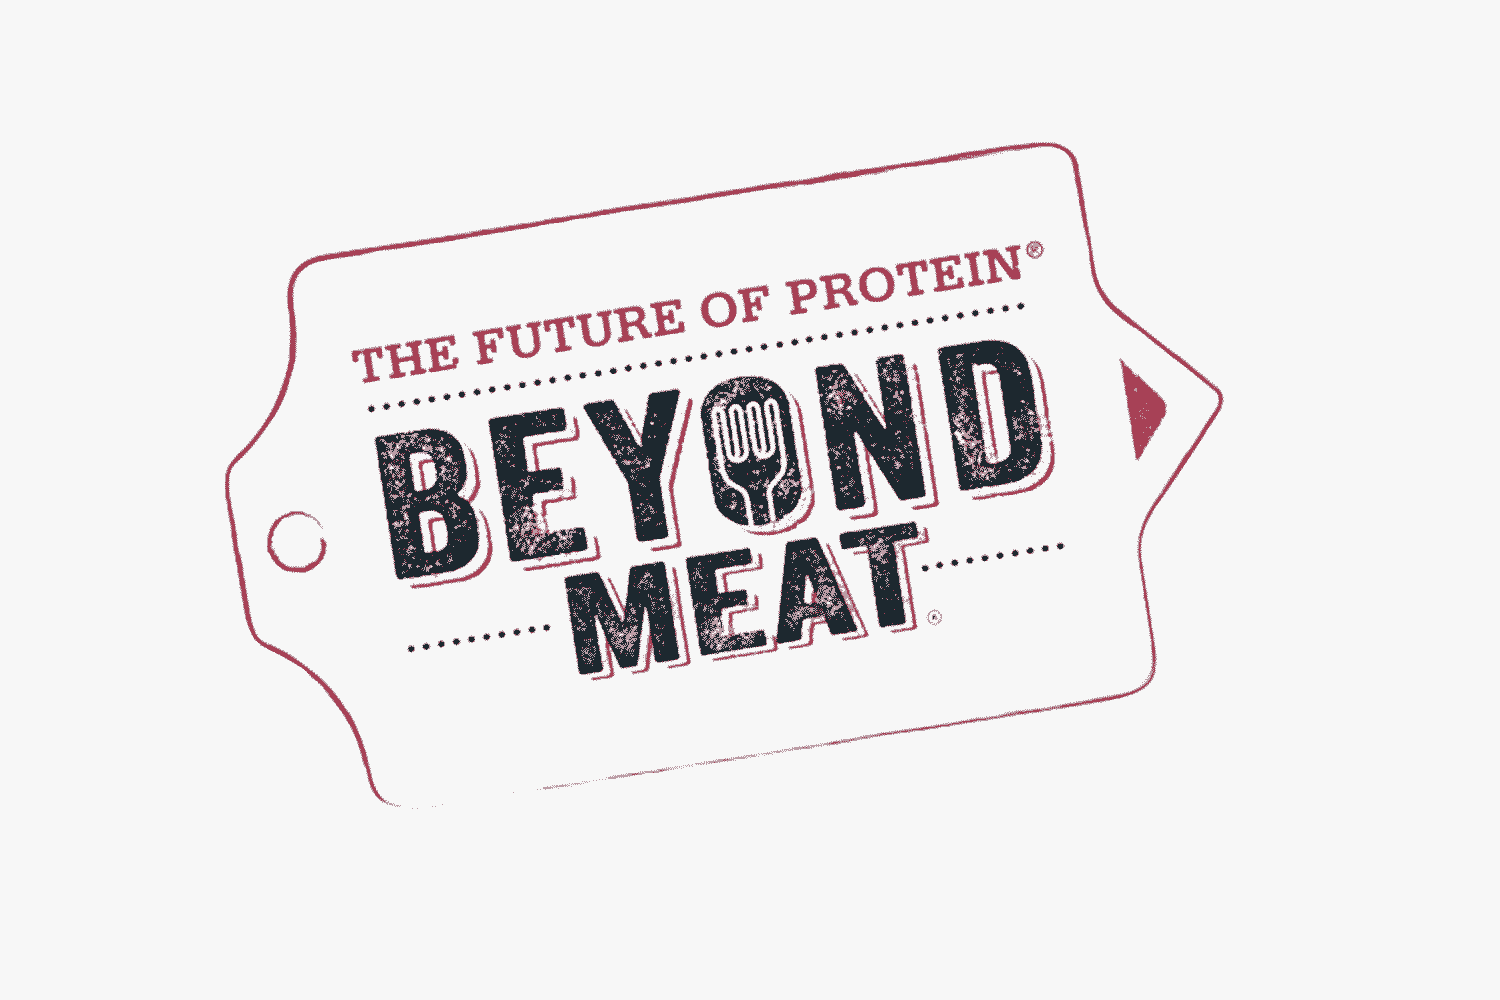 Beyond Meat just launched a plant-based product for beef lovers